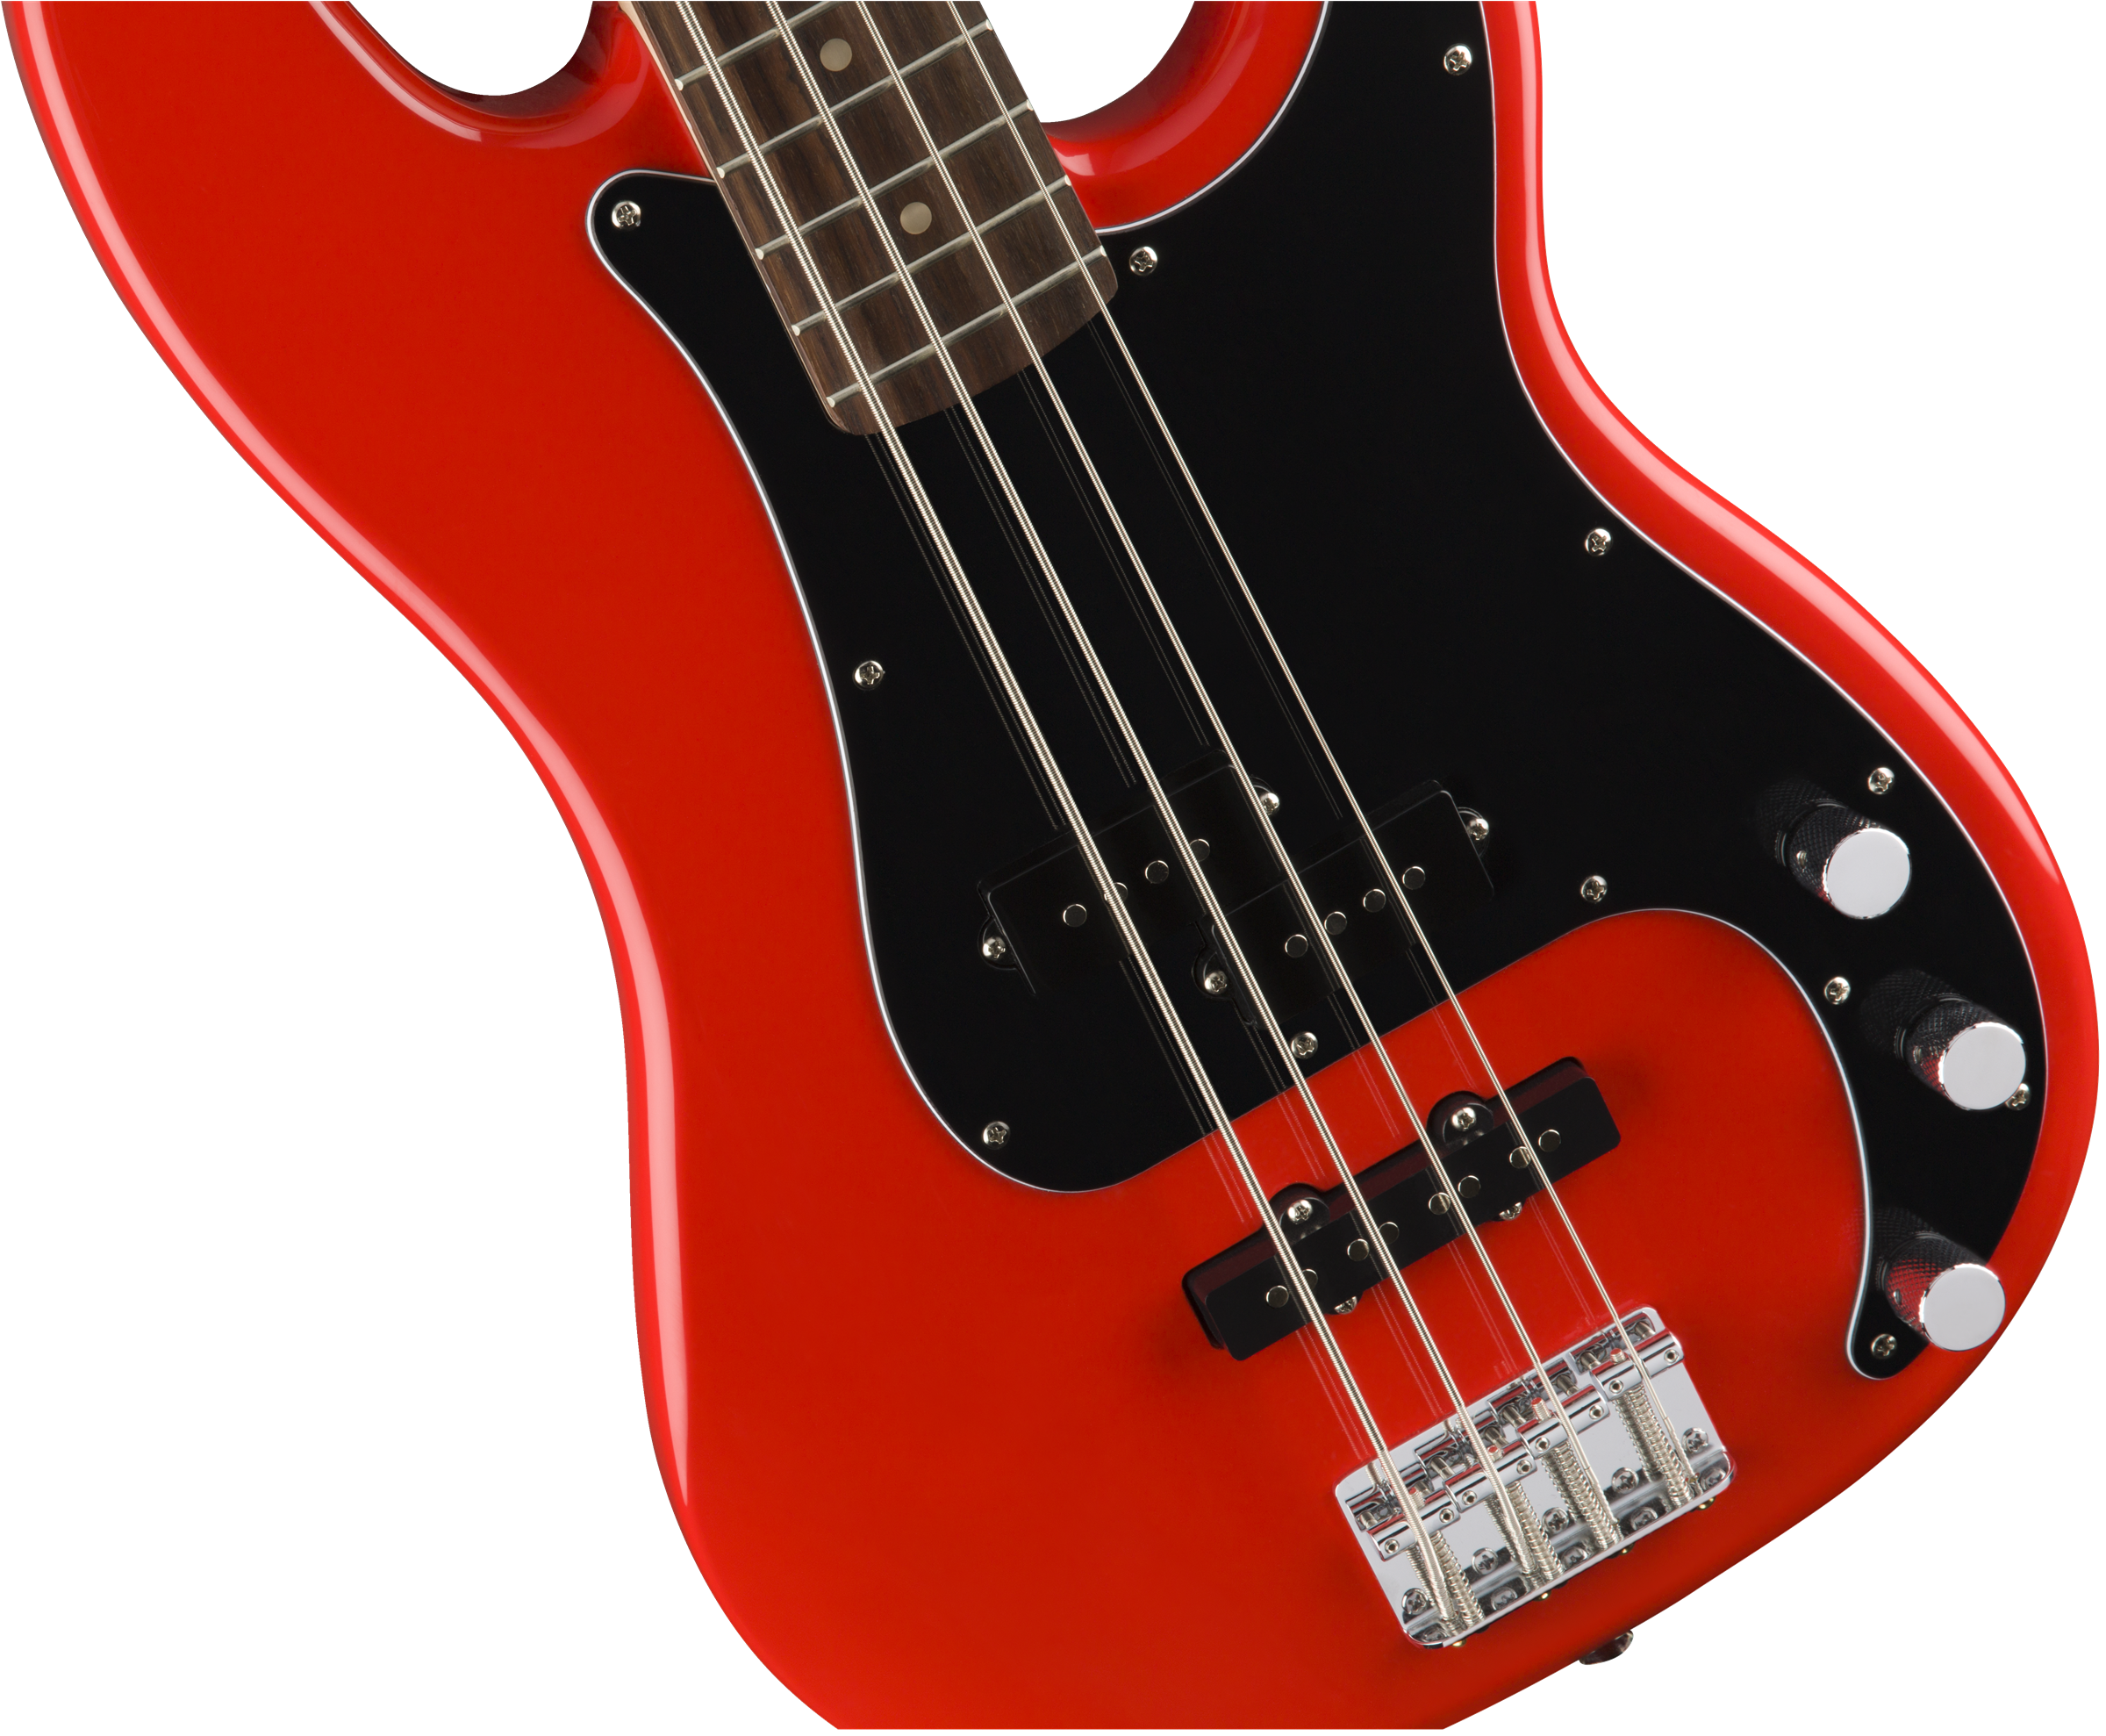 Squier Affinity Series Precision Bass PJ, Race Red 0370500570